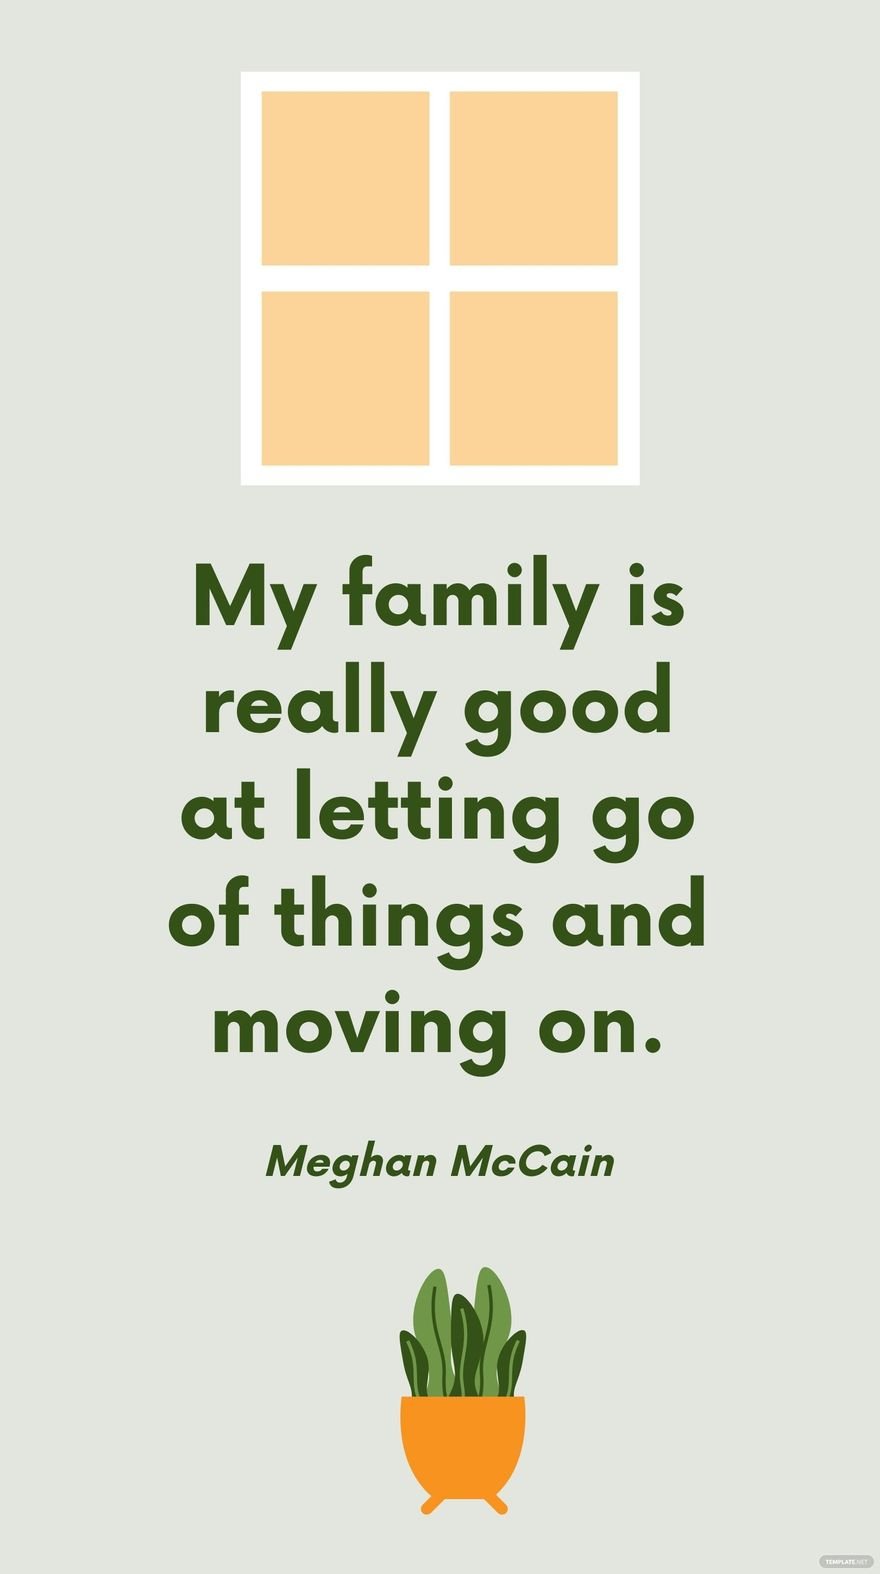 Meghan McCain - My family is really good at letting go of things and moving on.